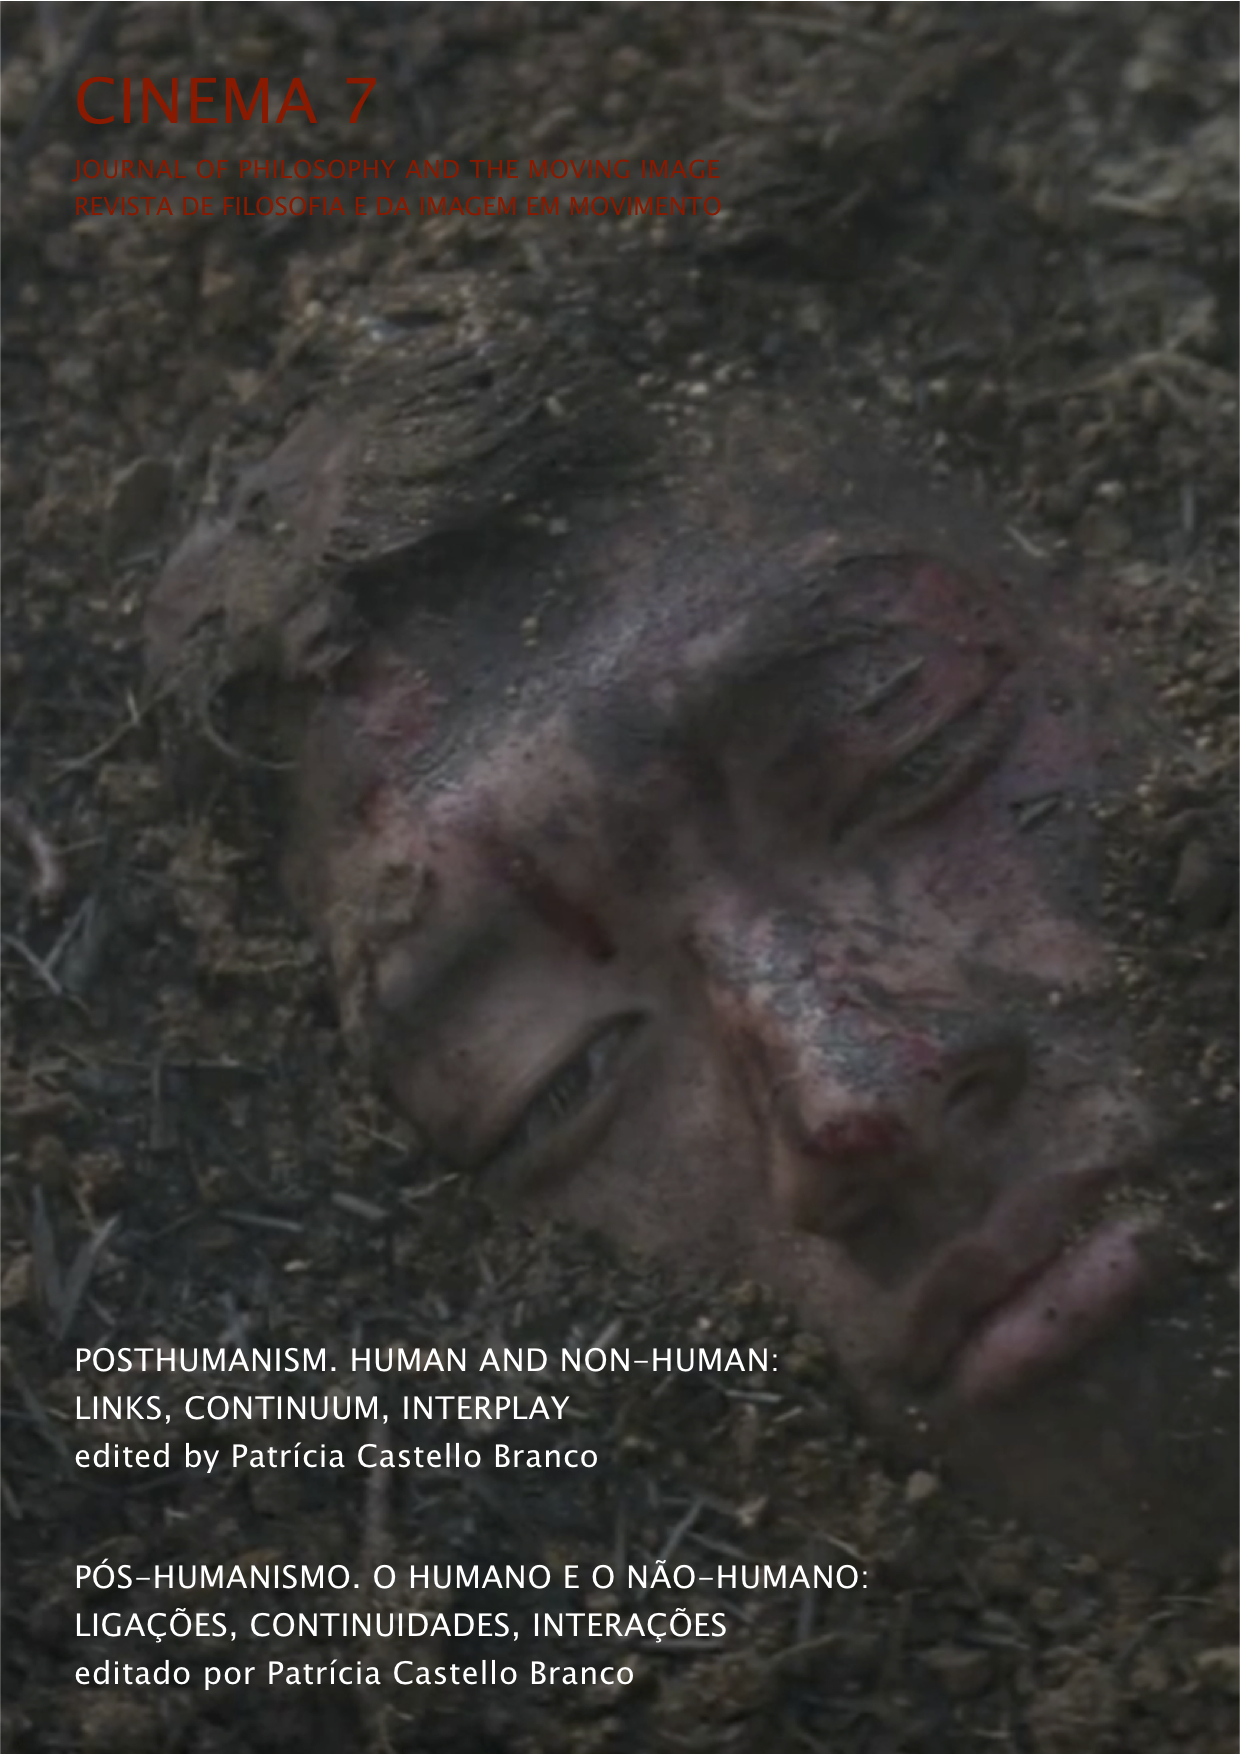 					View No. 7 (2015): Posthumanism. Human and Non- human: Links, Continuum, Interplay
				